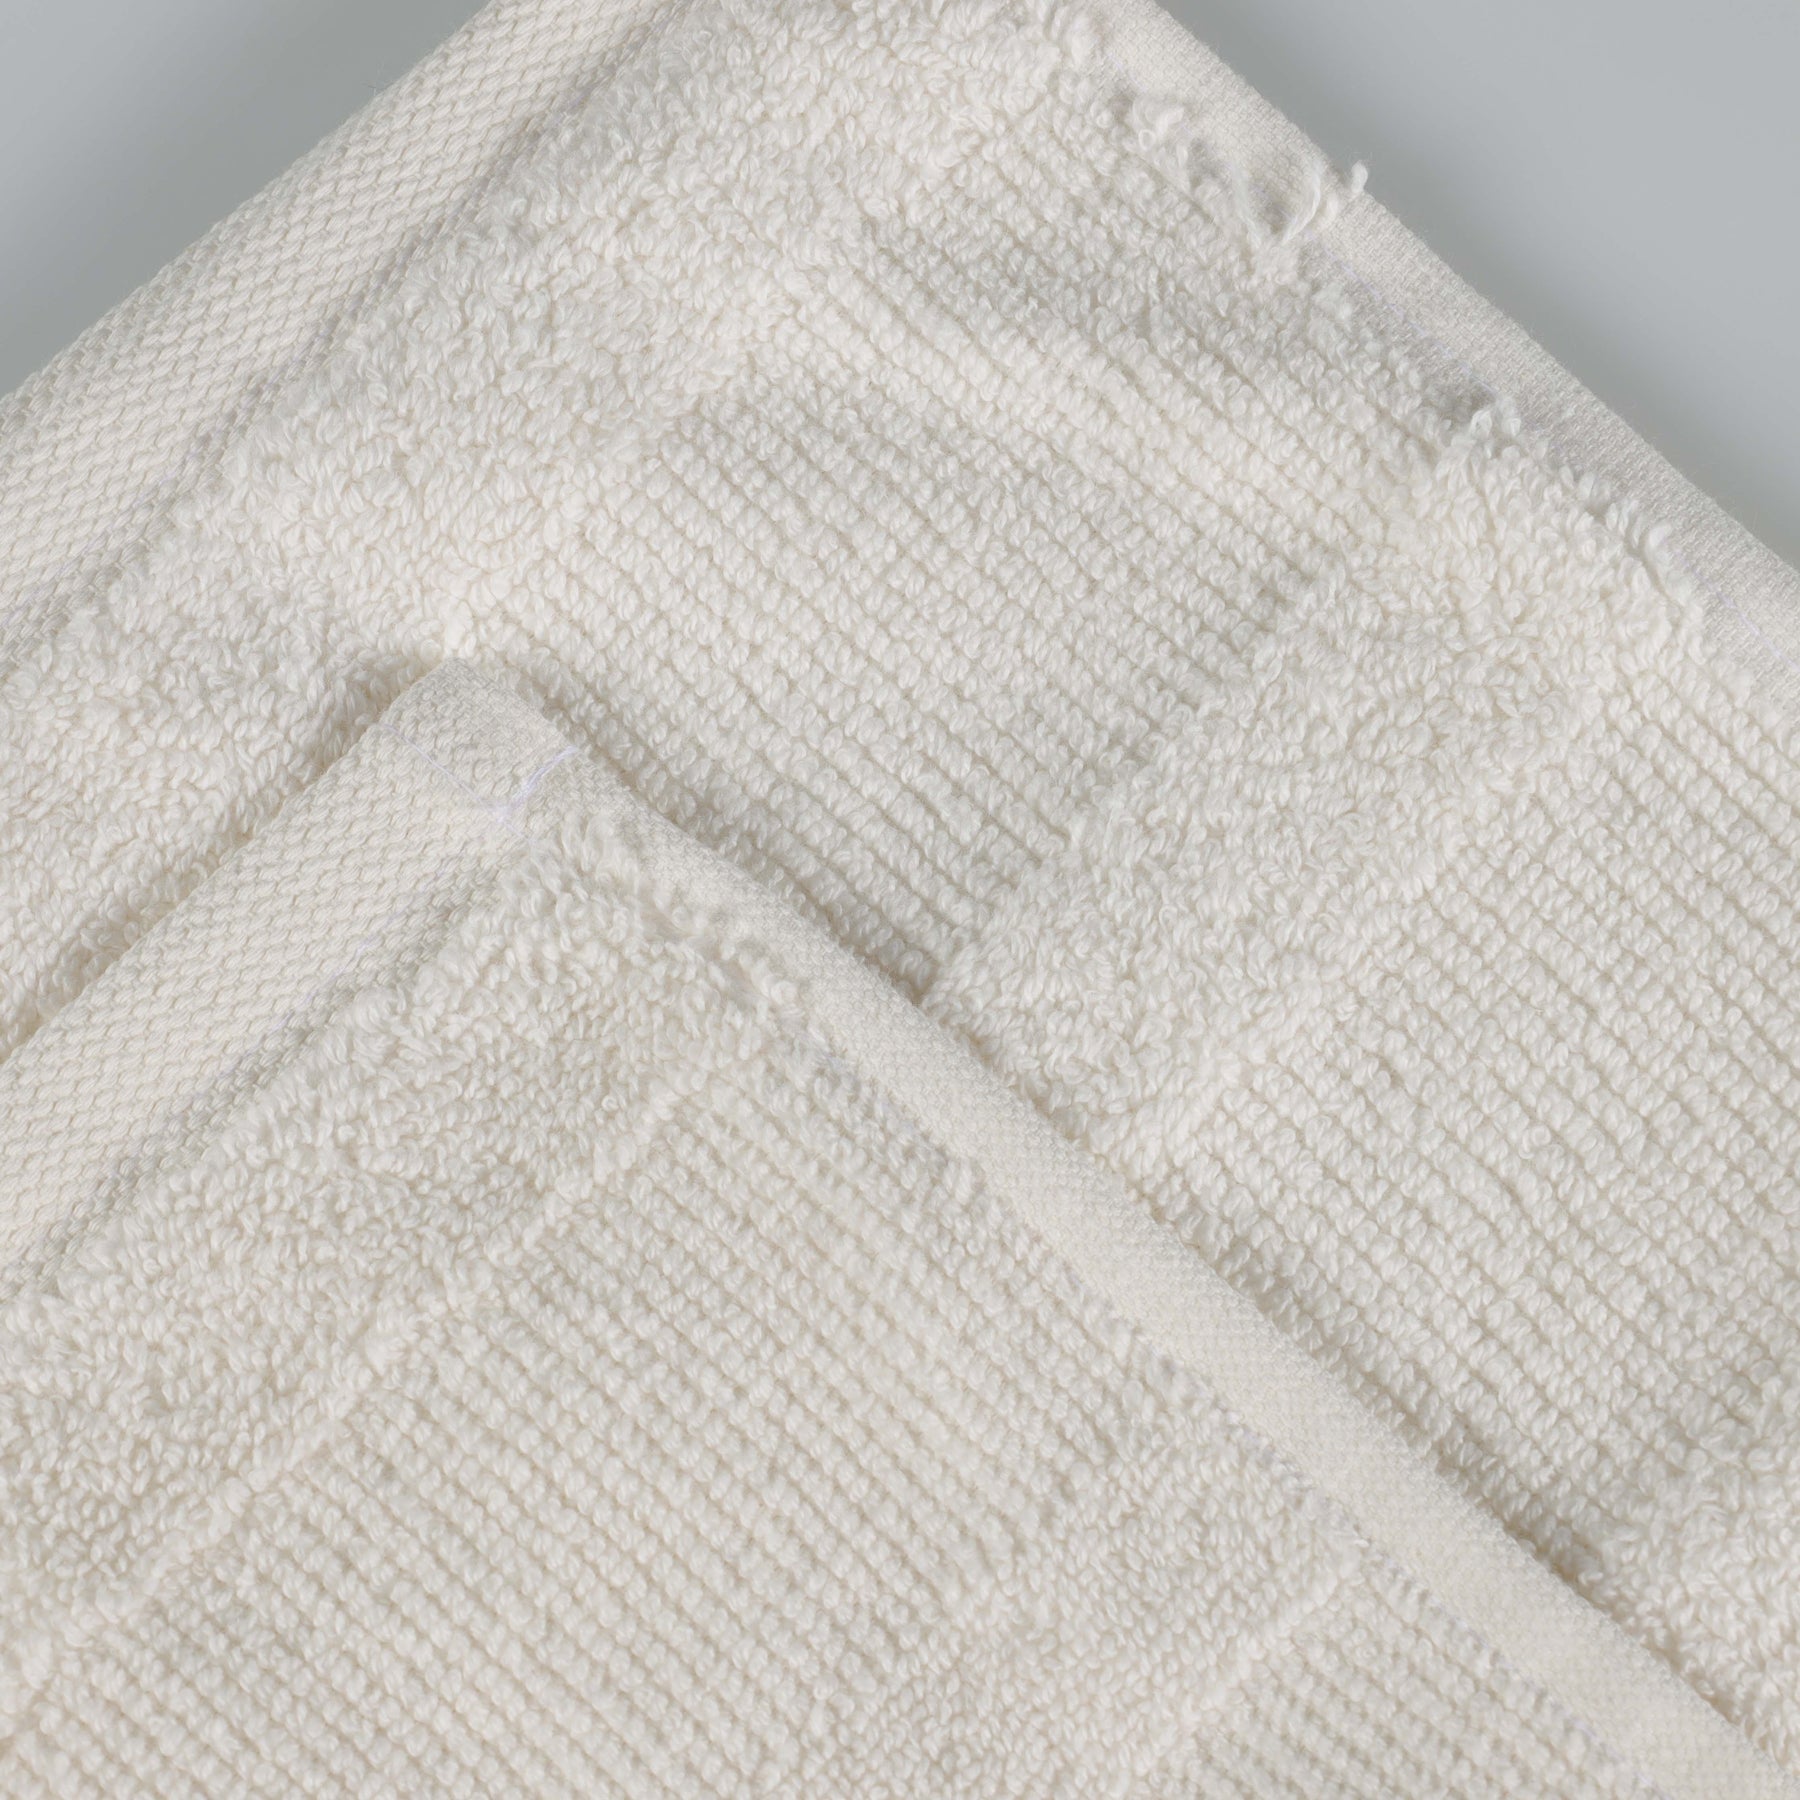 Roma Cotton Ribbed Textured Soft Highly Absorbent Bath Towel - Ivory